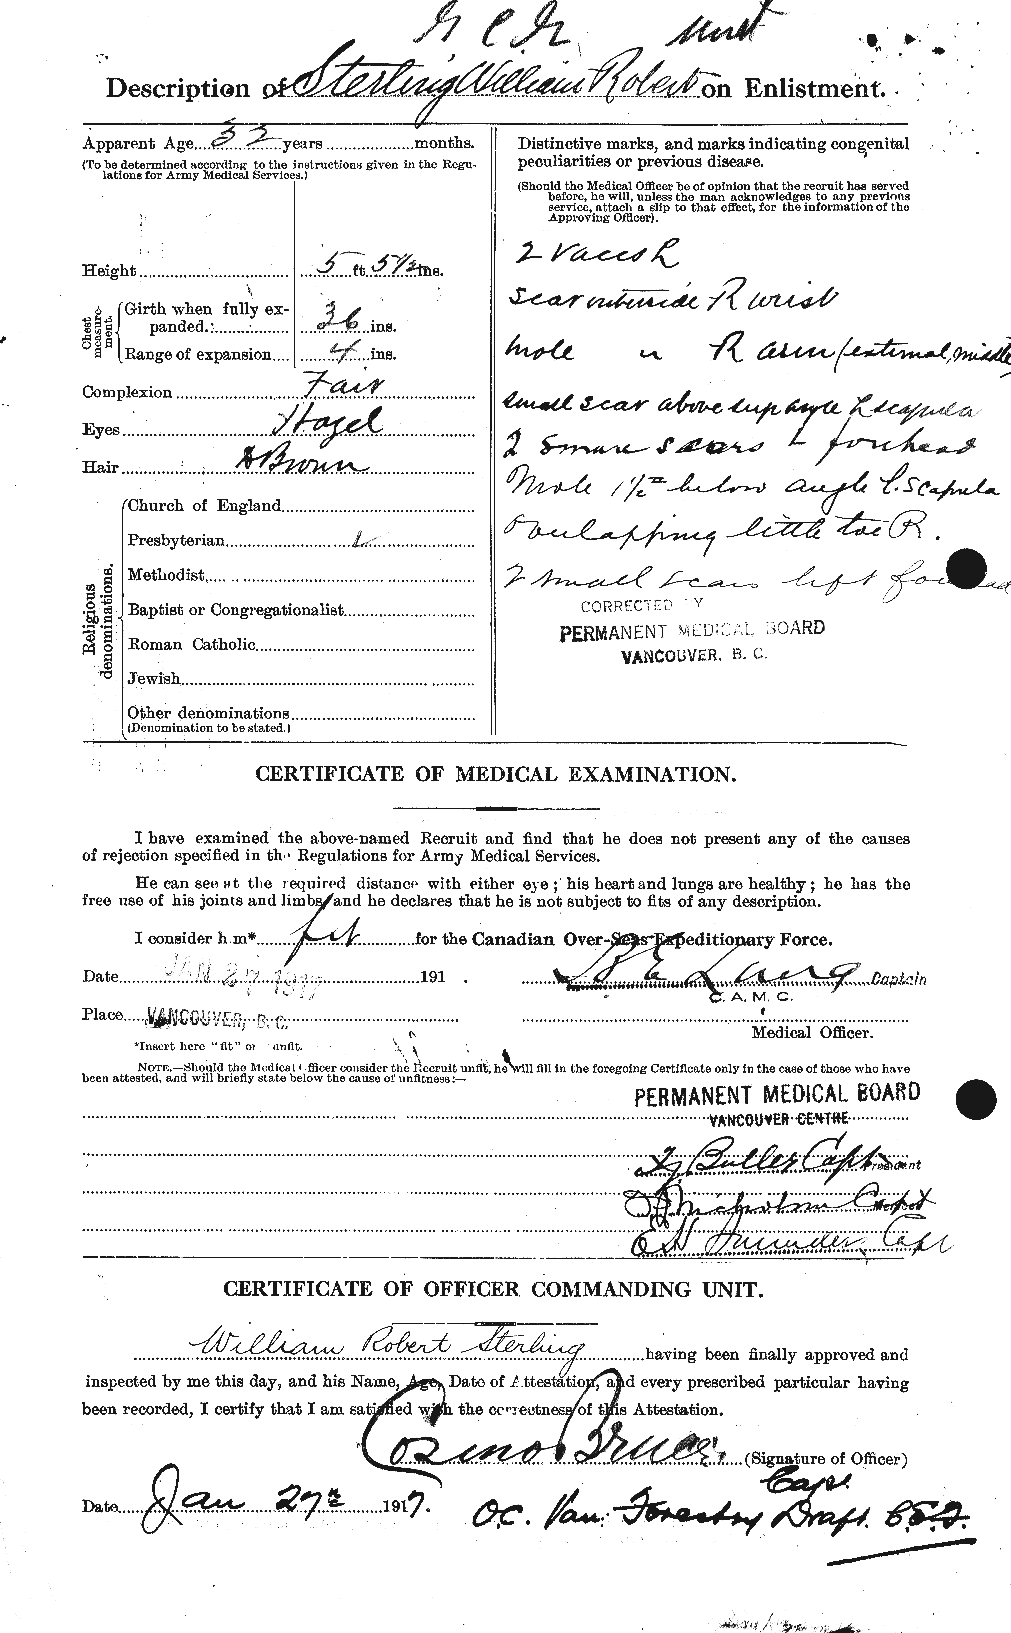 Personnel Records of the First World War - CEF 115147b